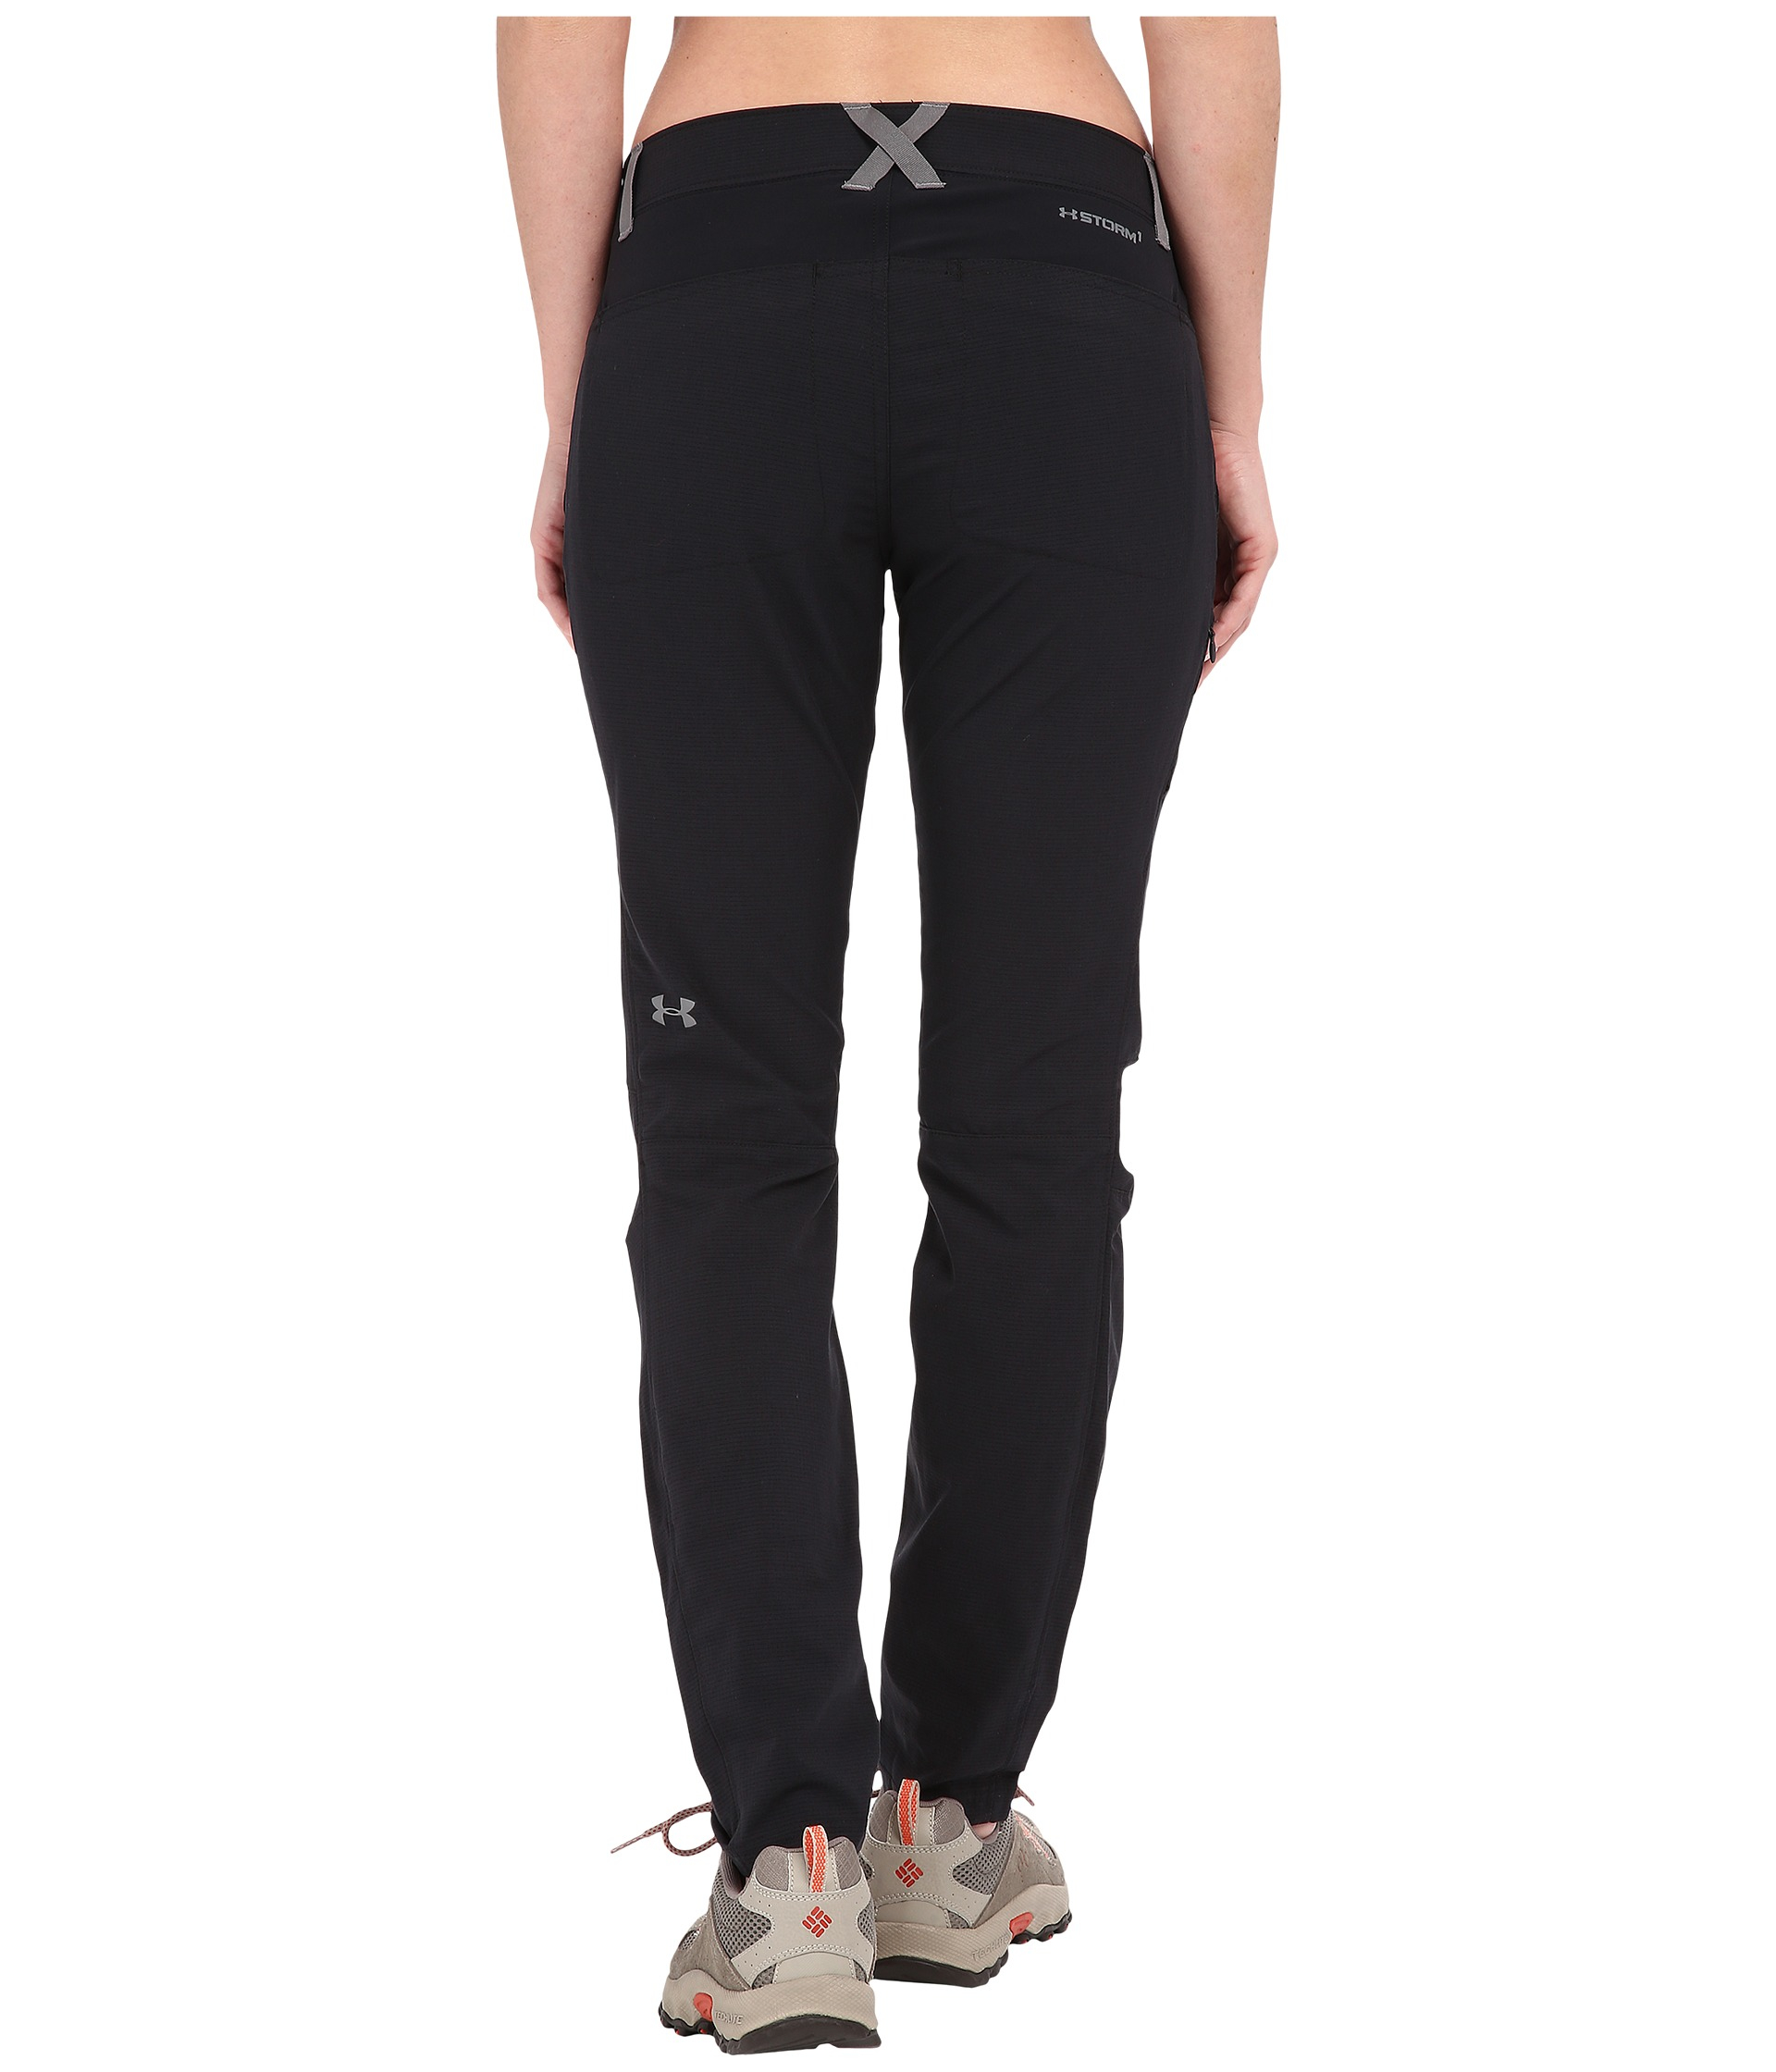 Ua Armourvent Trail Pants in Black 